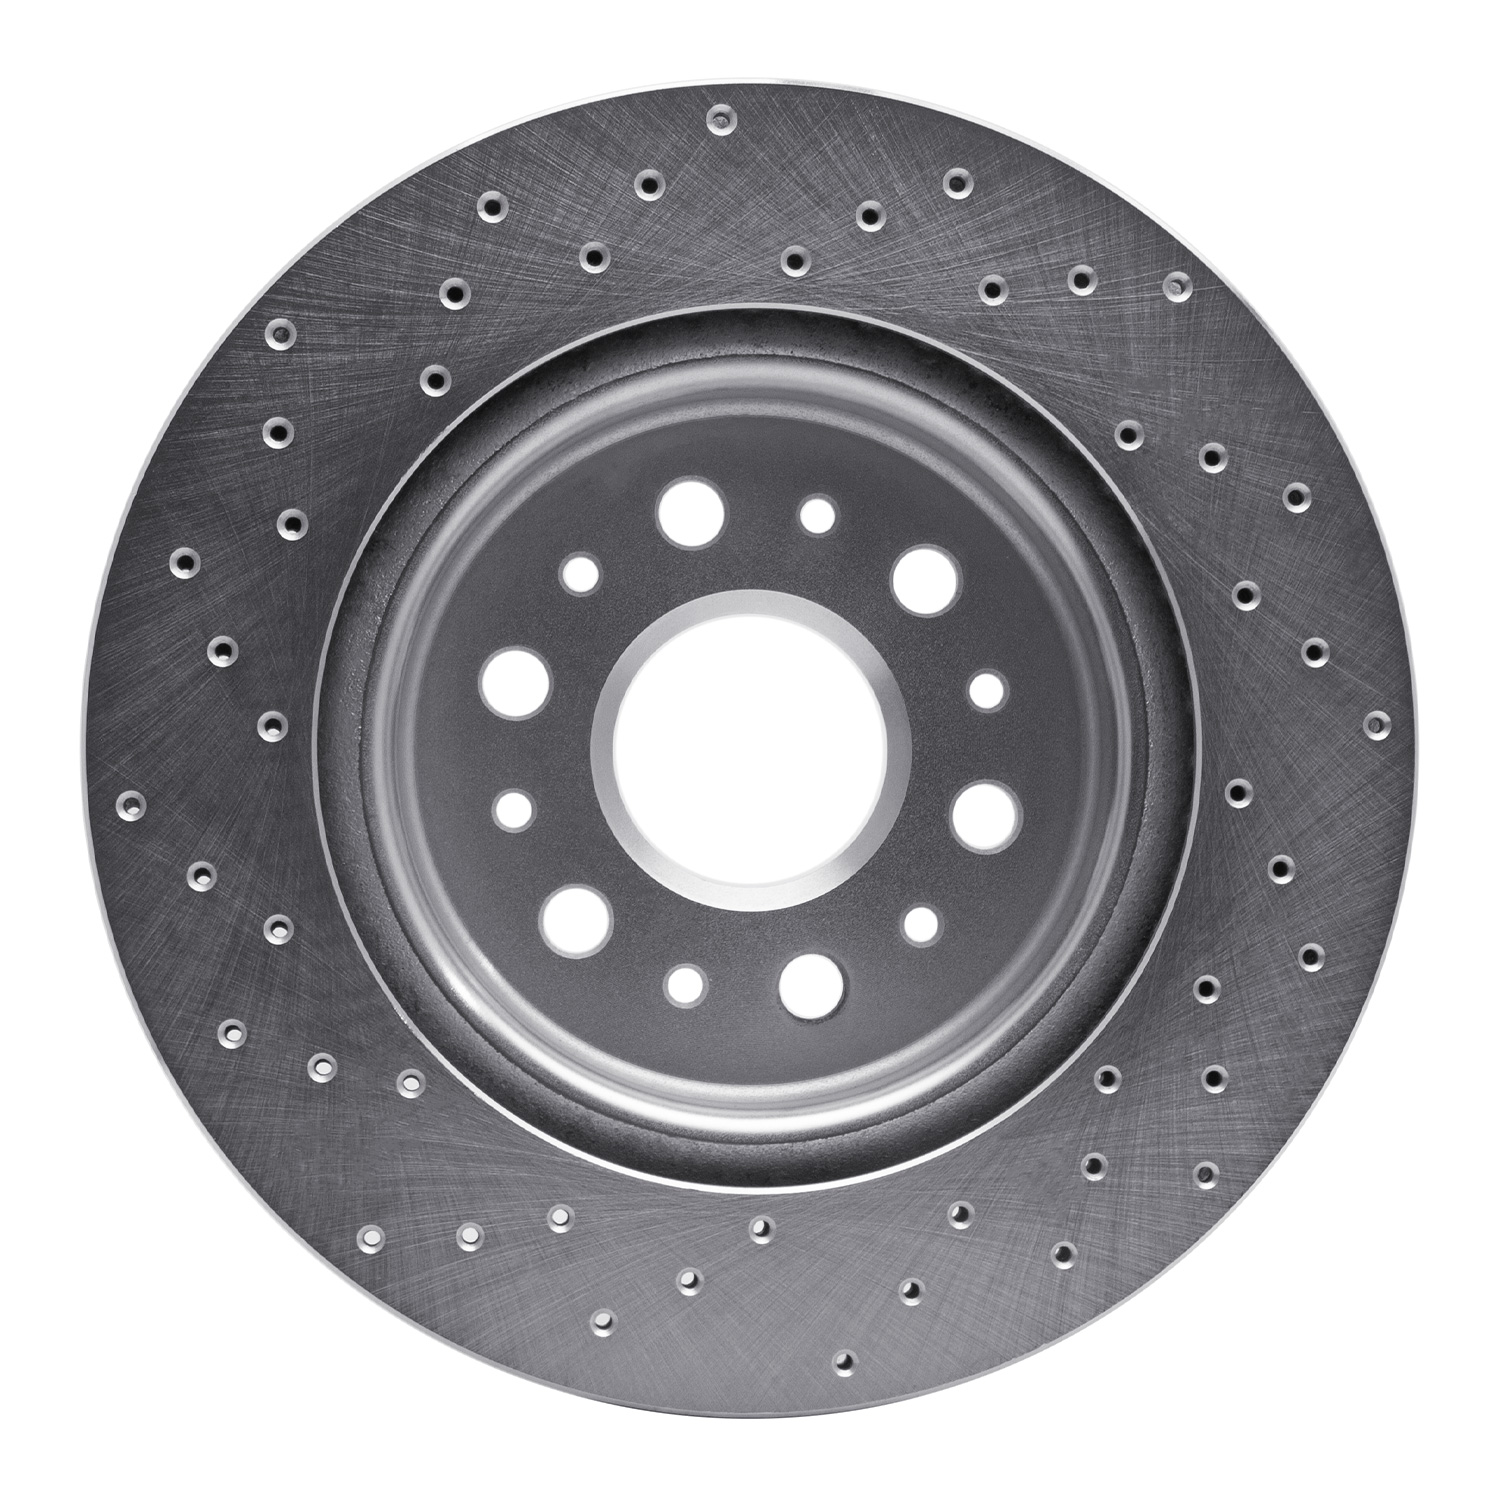 Drilled Brake Rotor [Silver], Fits Select GM